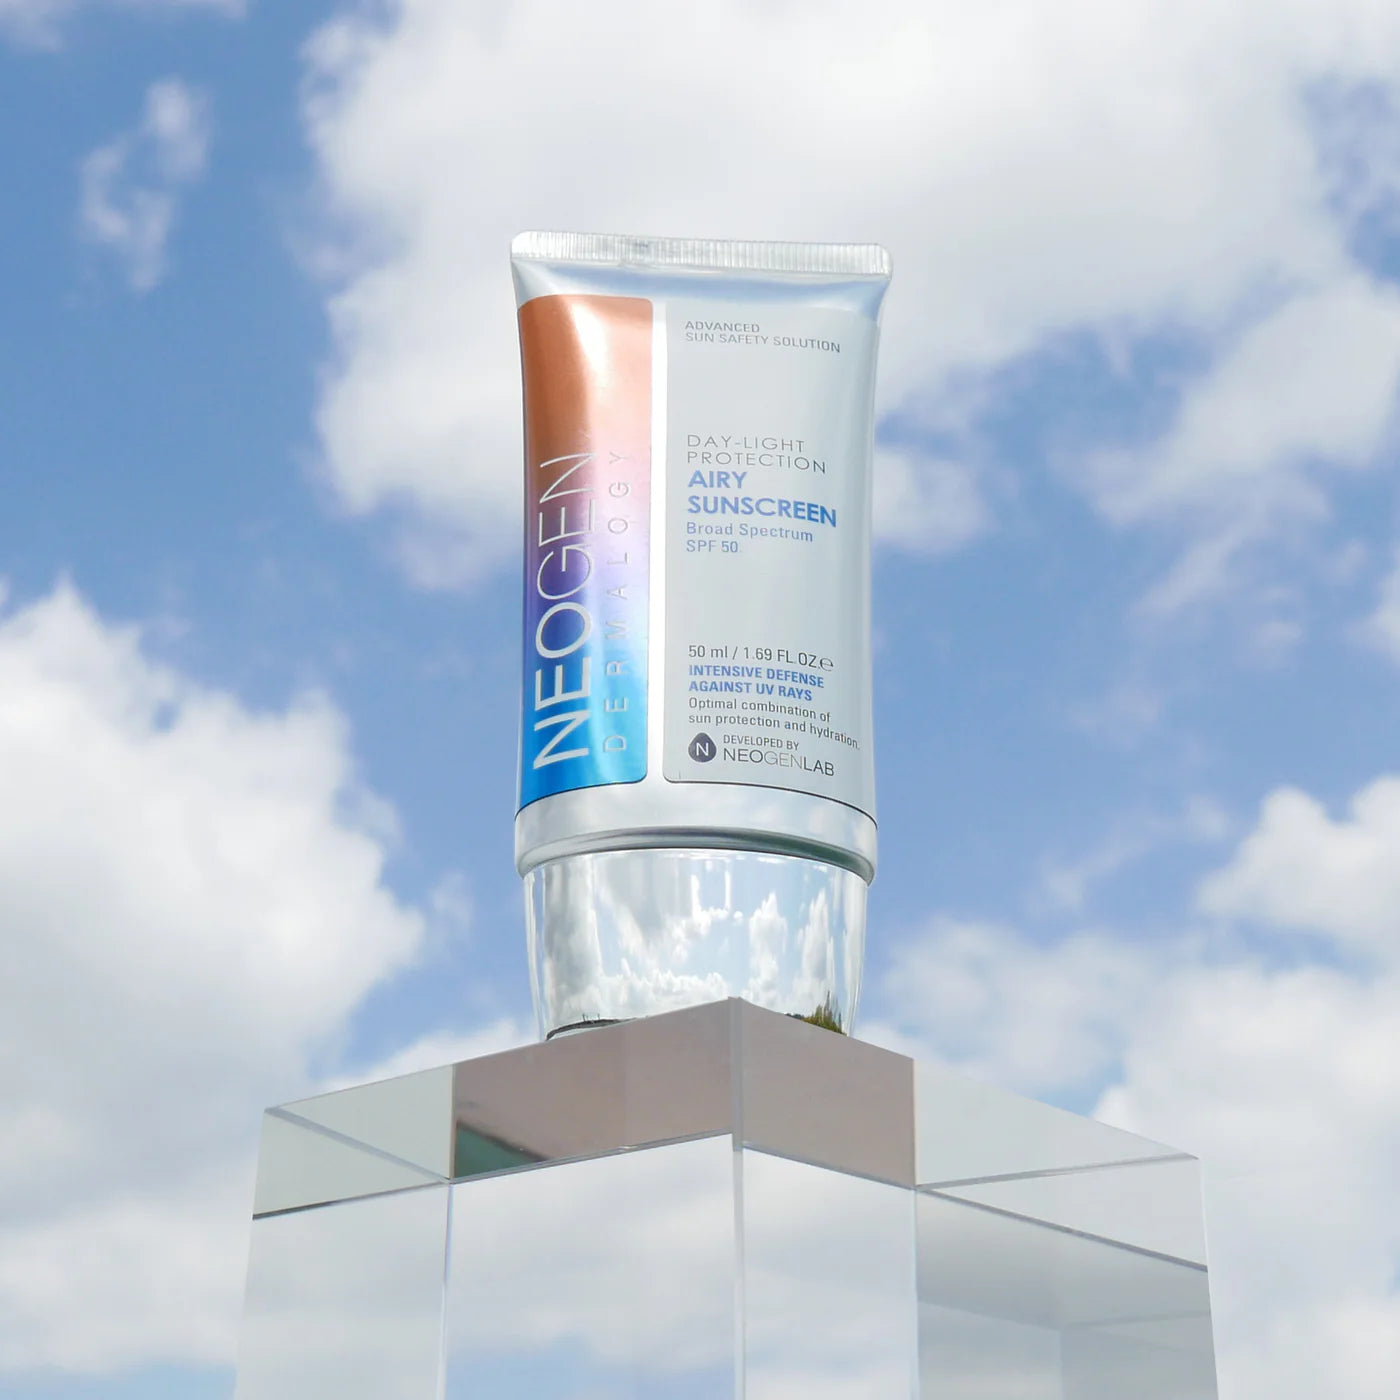 Urban Warrior's Must-Have: Dermalogy Day-Light Protection Airy Sunscreen for City Life